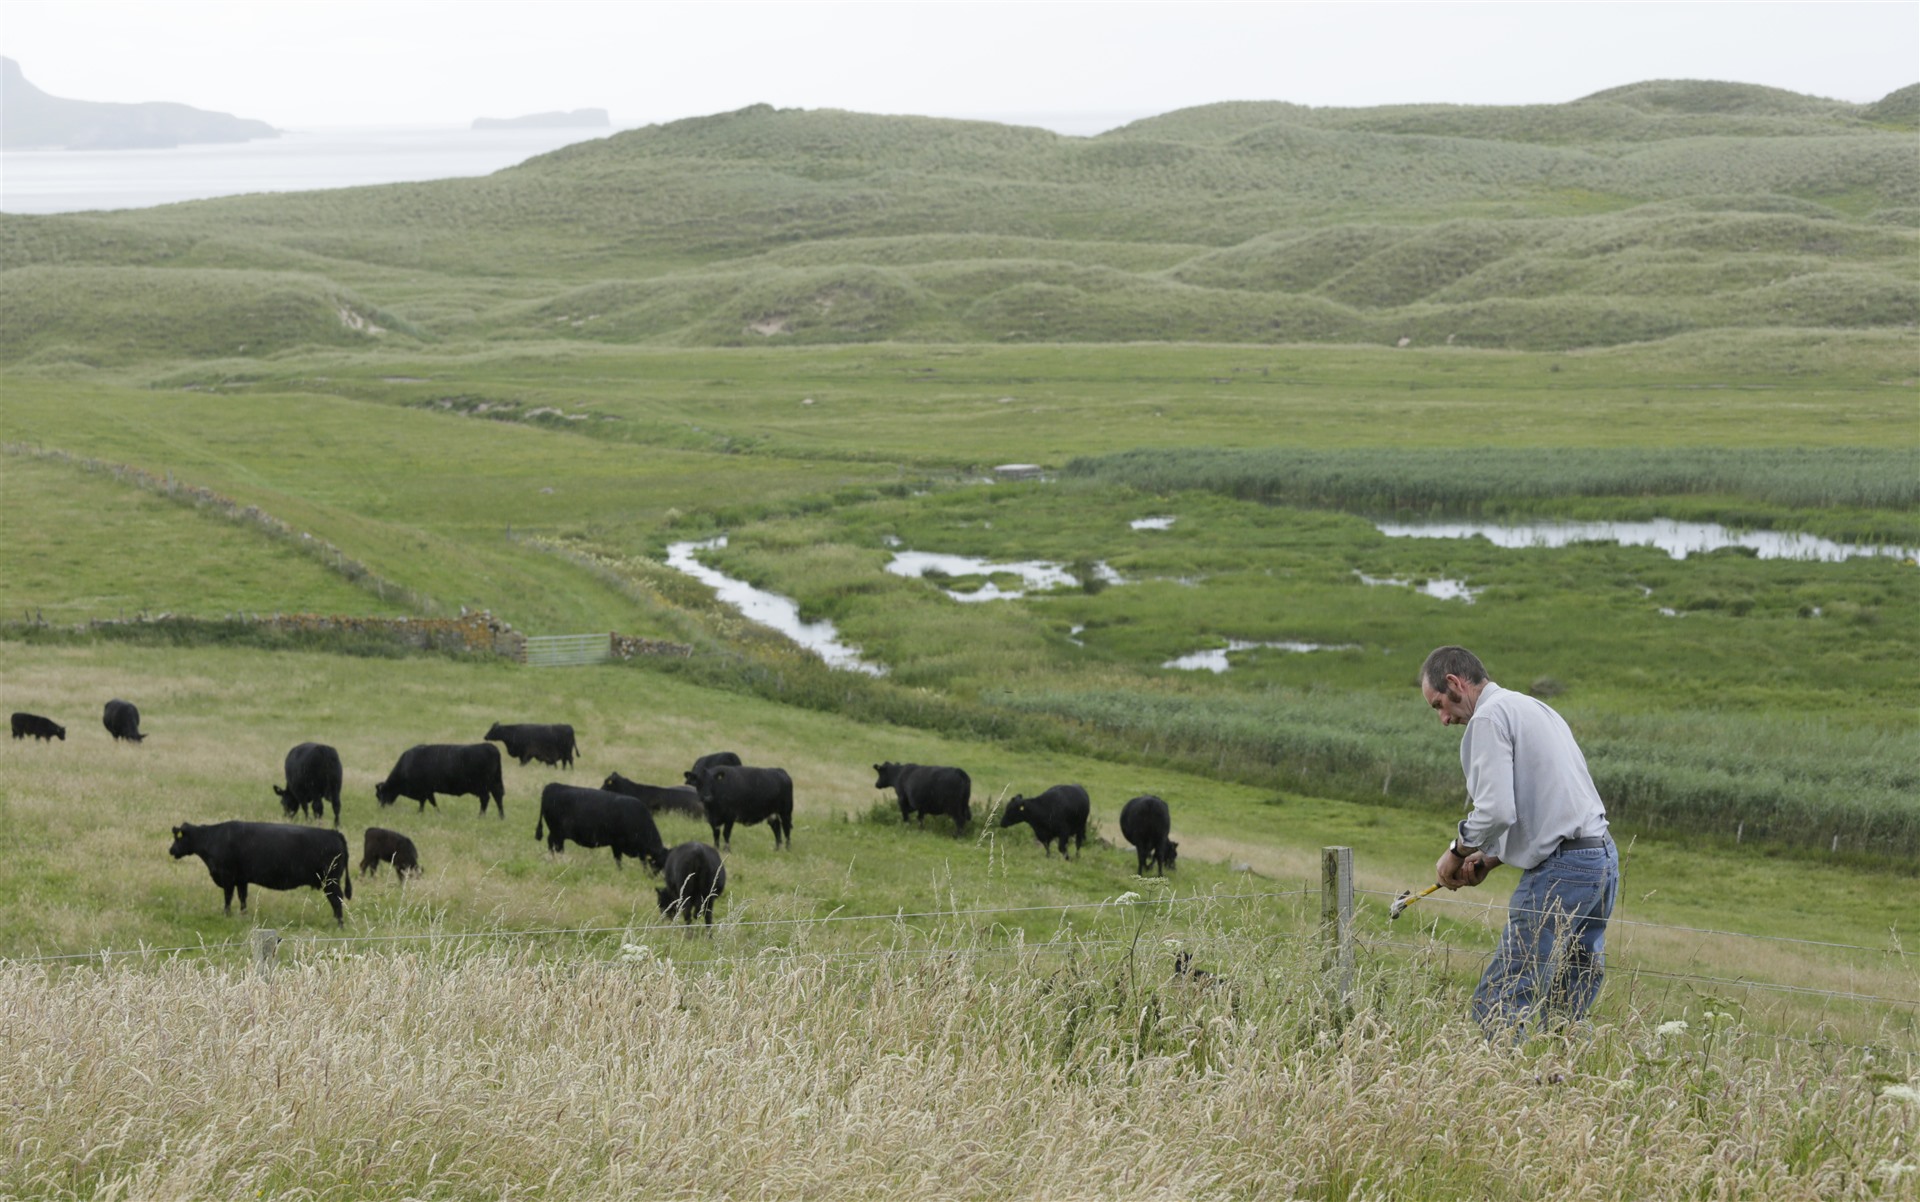 A farmer is repairing a fence in a field full of cattle. There are hills and grasslands in the background.